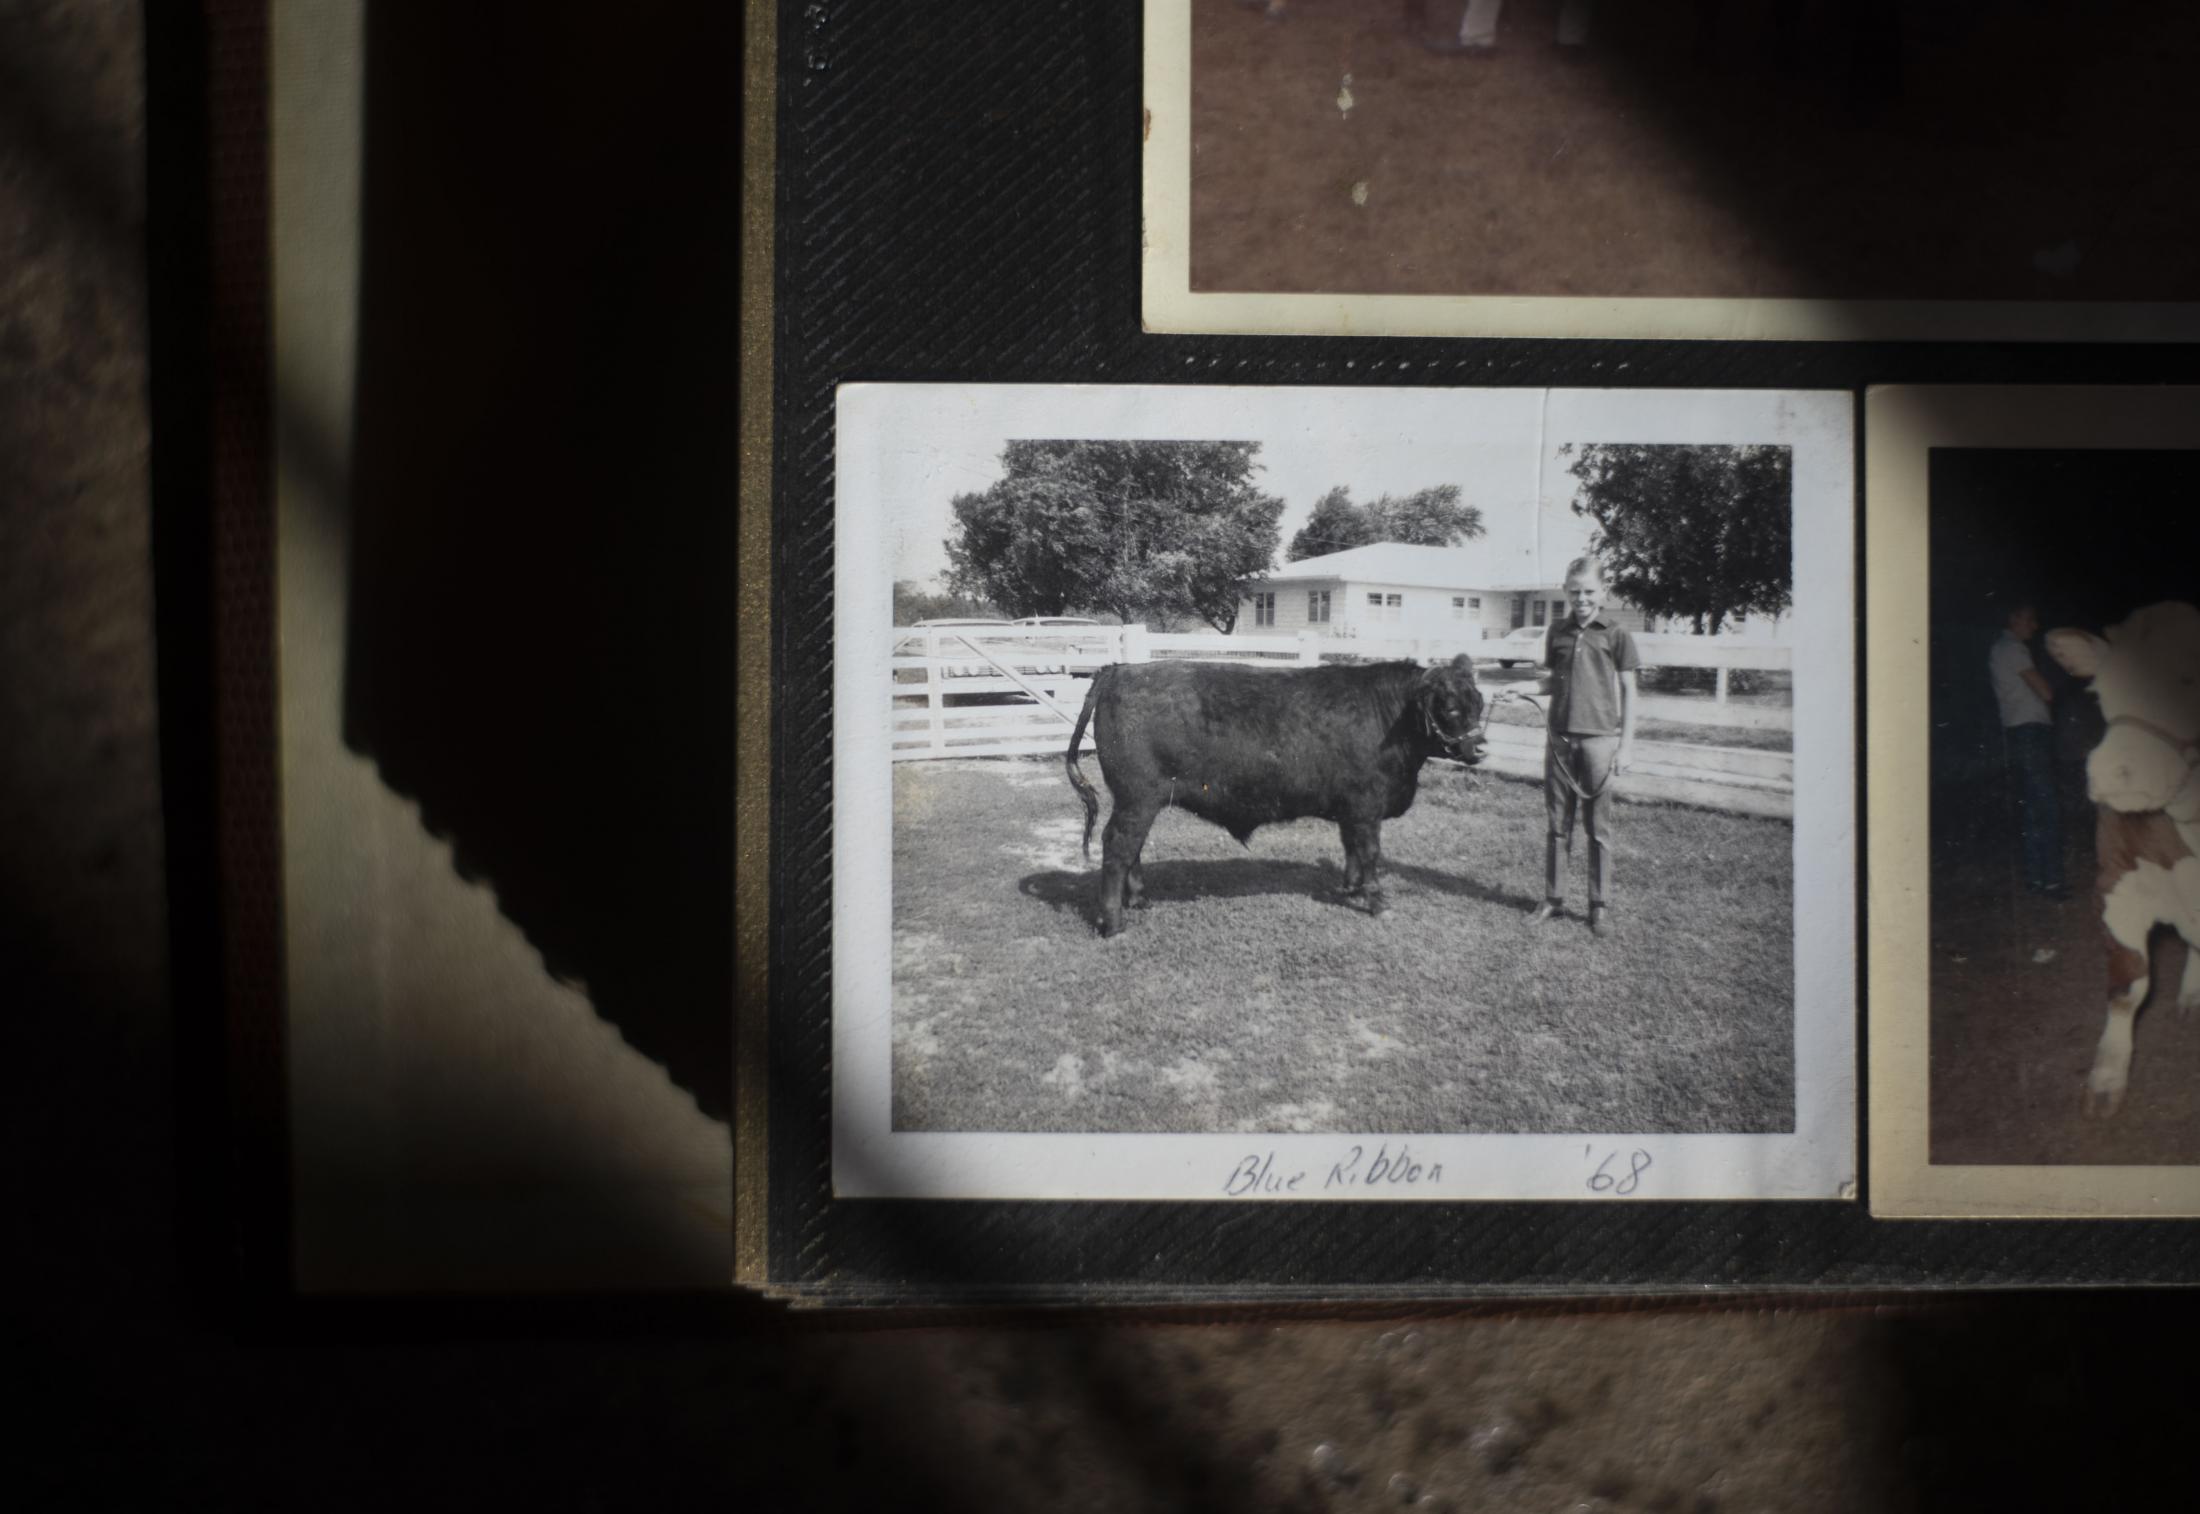 A 1968 photograph showing my great-uncle, Rusty Reed, with a &ldquo;Blue Ribbon&rdquo; calf is photographed Dec. 5. Rusty is the youngest of his three brothers.